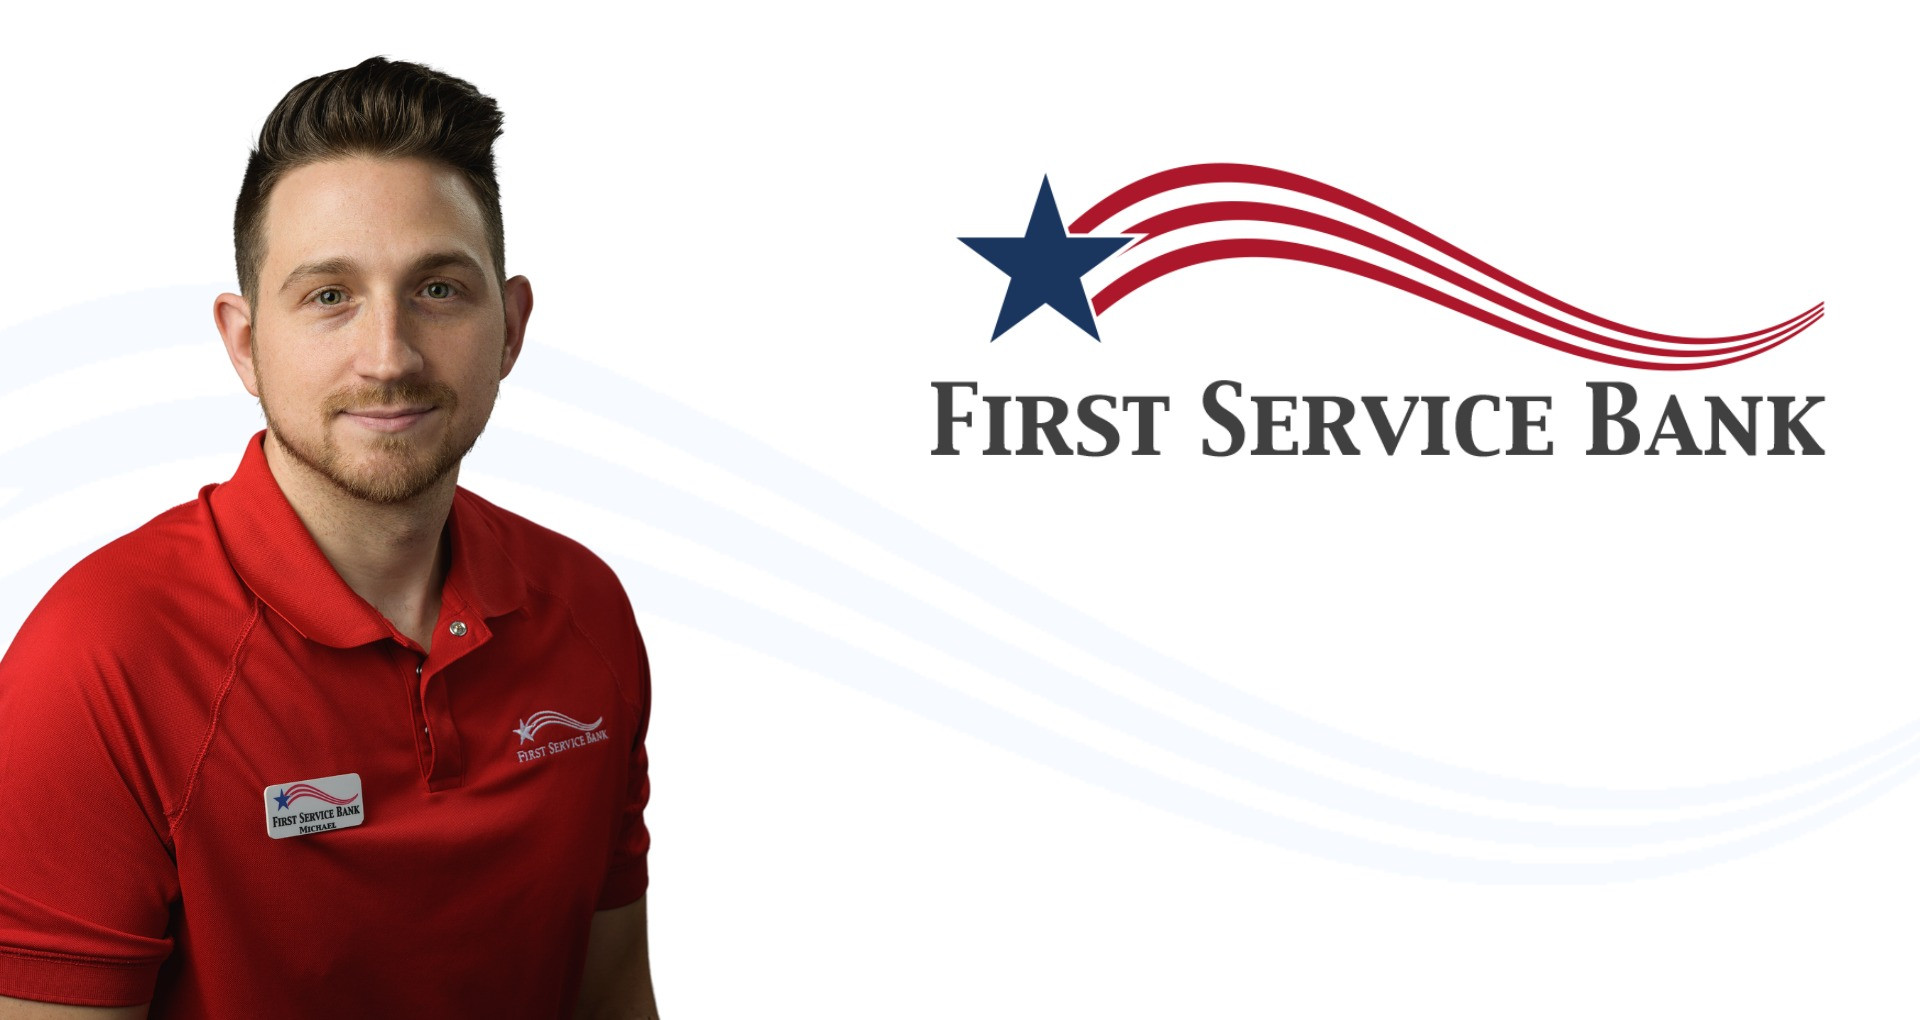 First Service Bank Announces Job Promotion of Michael Manley to Commercial Loan Officer and Senior Credit Analyst